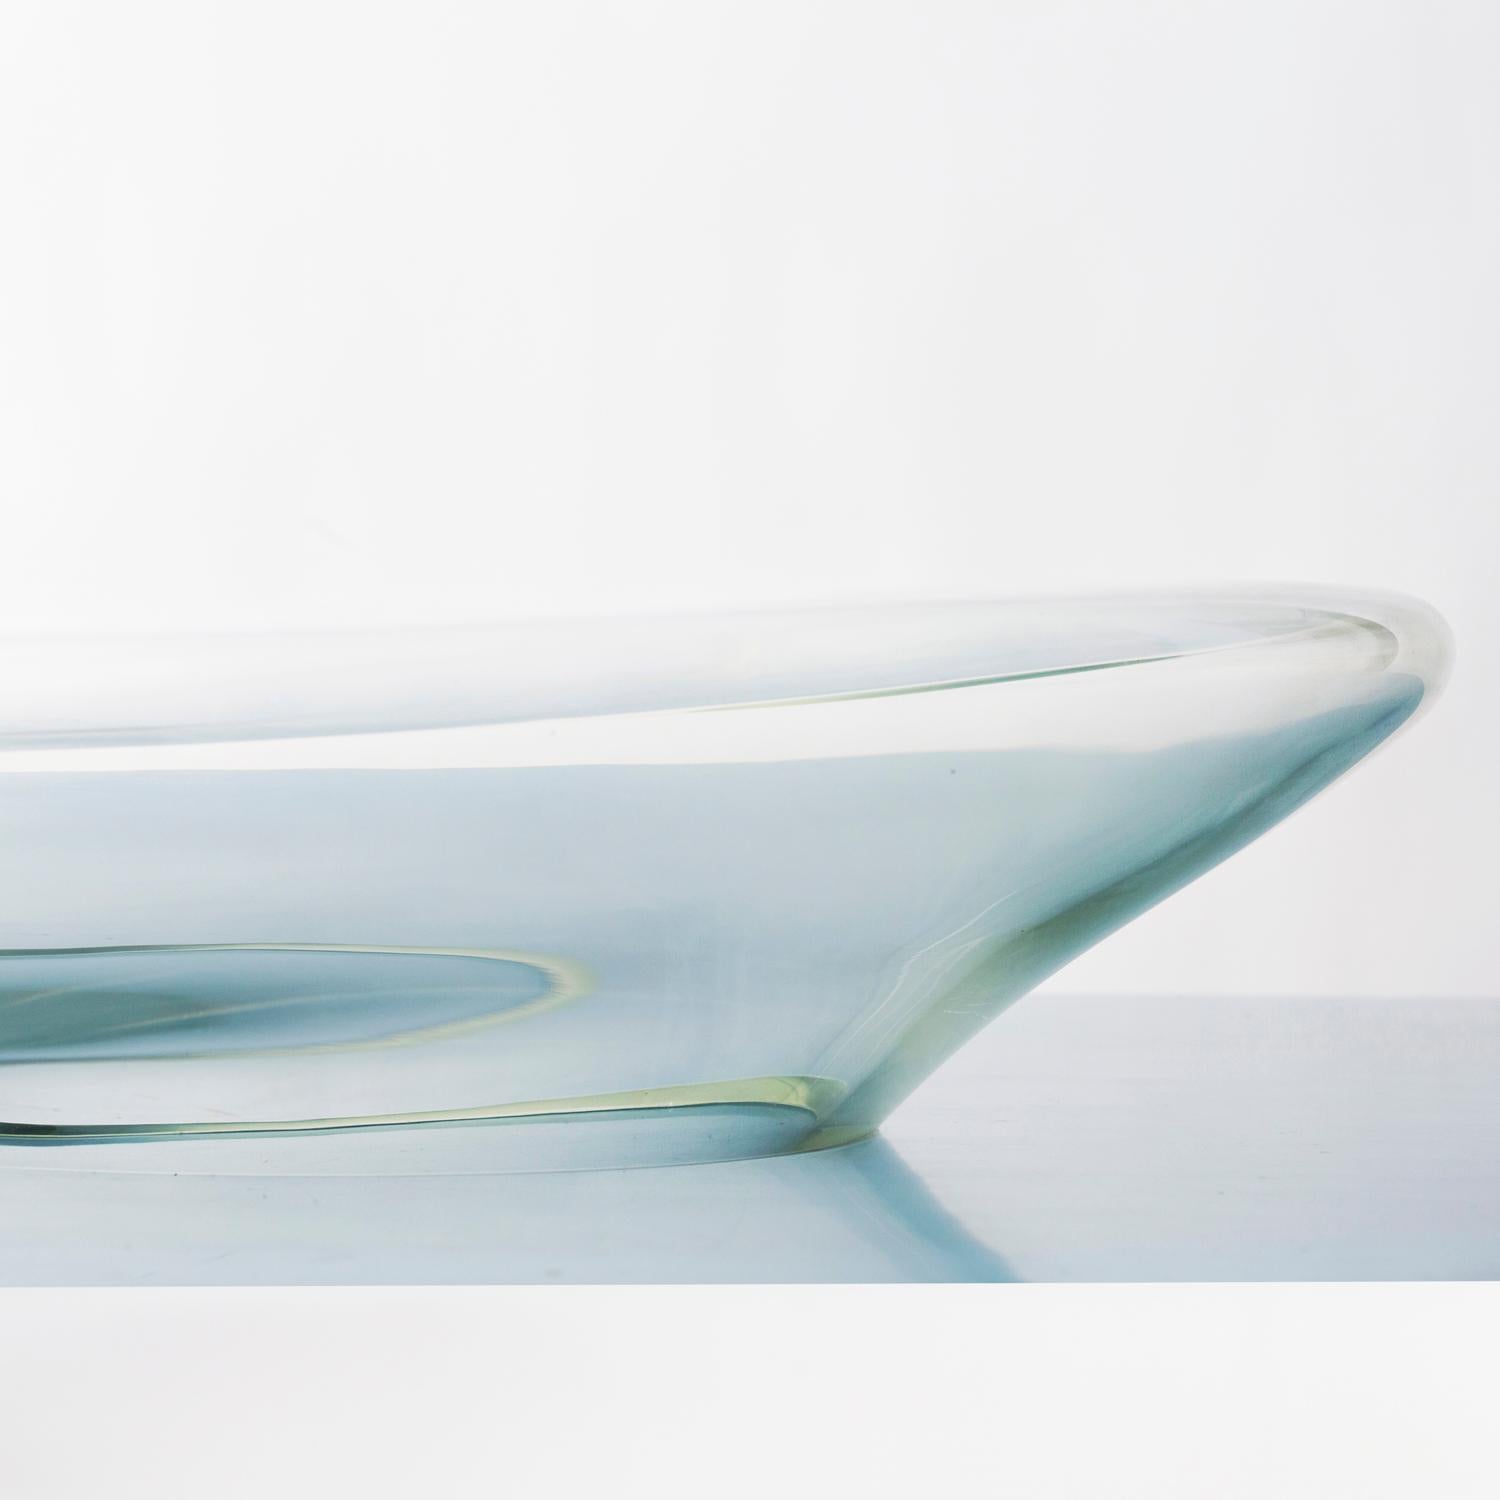 Pair of two Large Murano Centerpieces by Elenoire Peduzzi Riva for Vistosi, 1974 For Sale 1